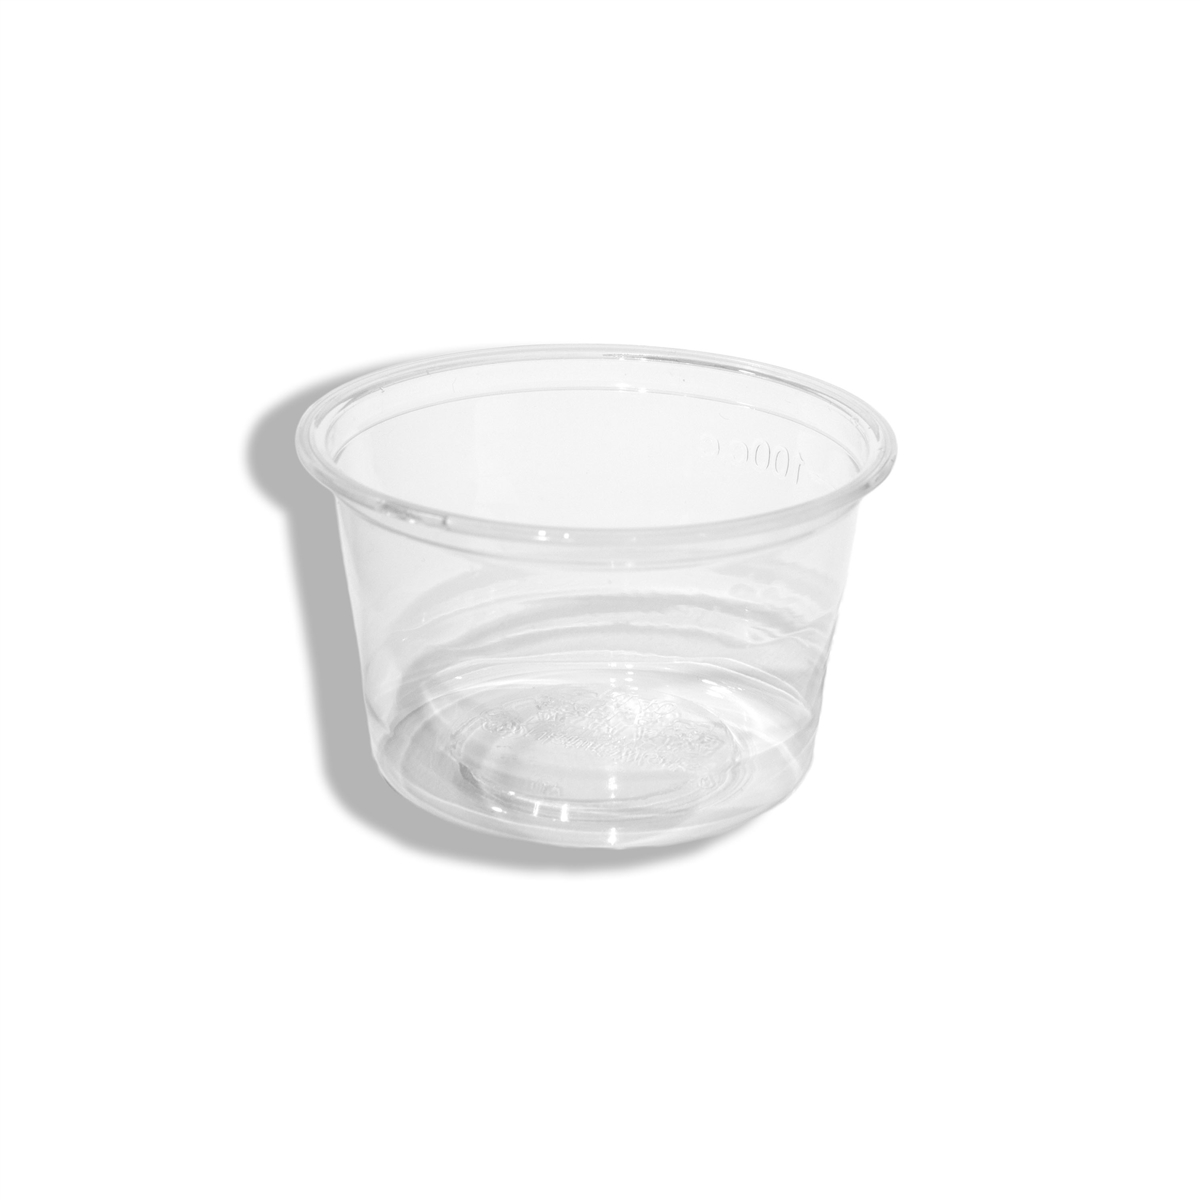 4 oz Jaya Compostable Clear PLA Portion Cup - 1000 ct